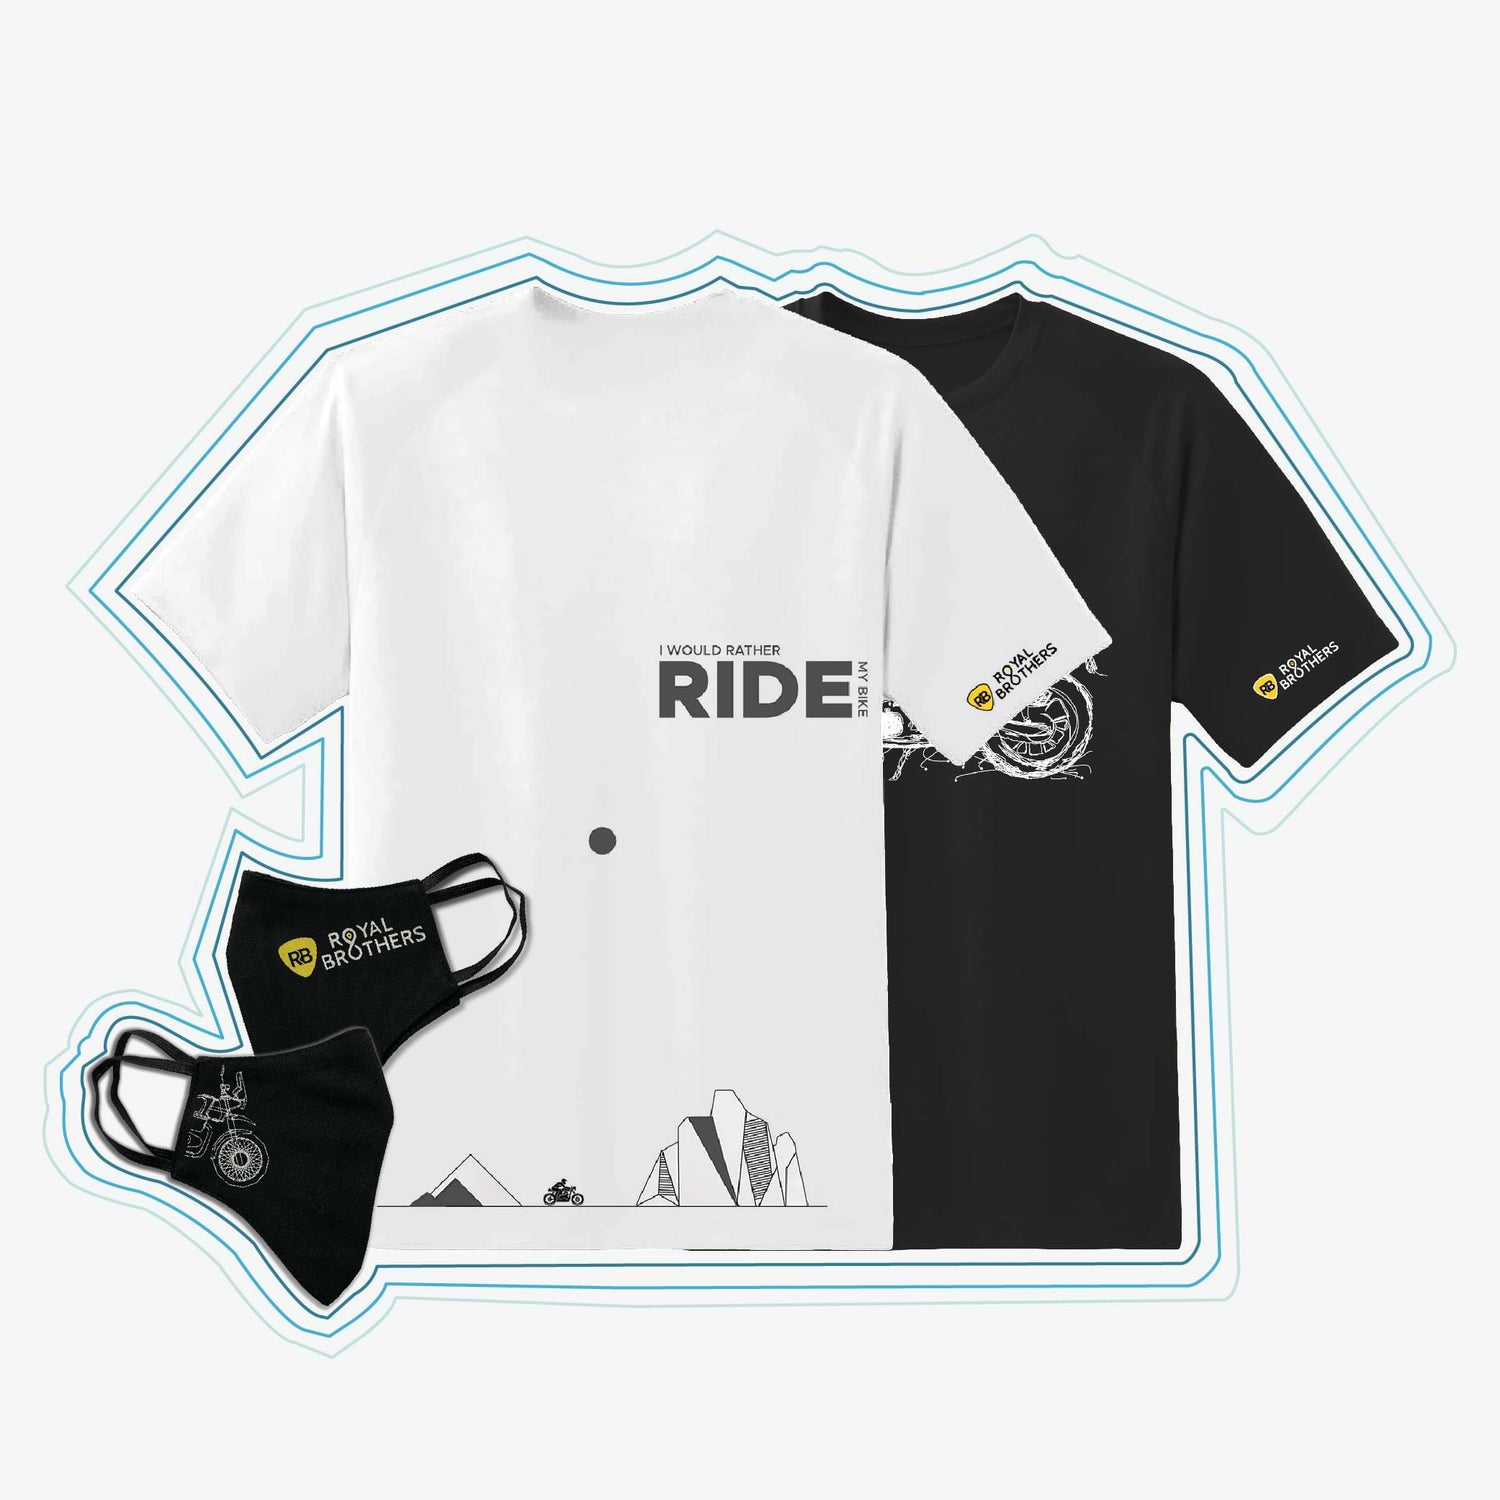 Collection of Biker T-Shirts